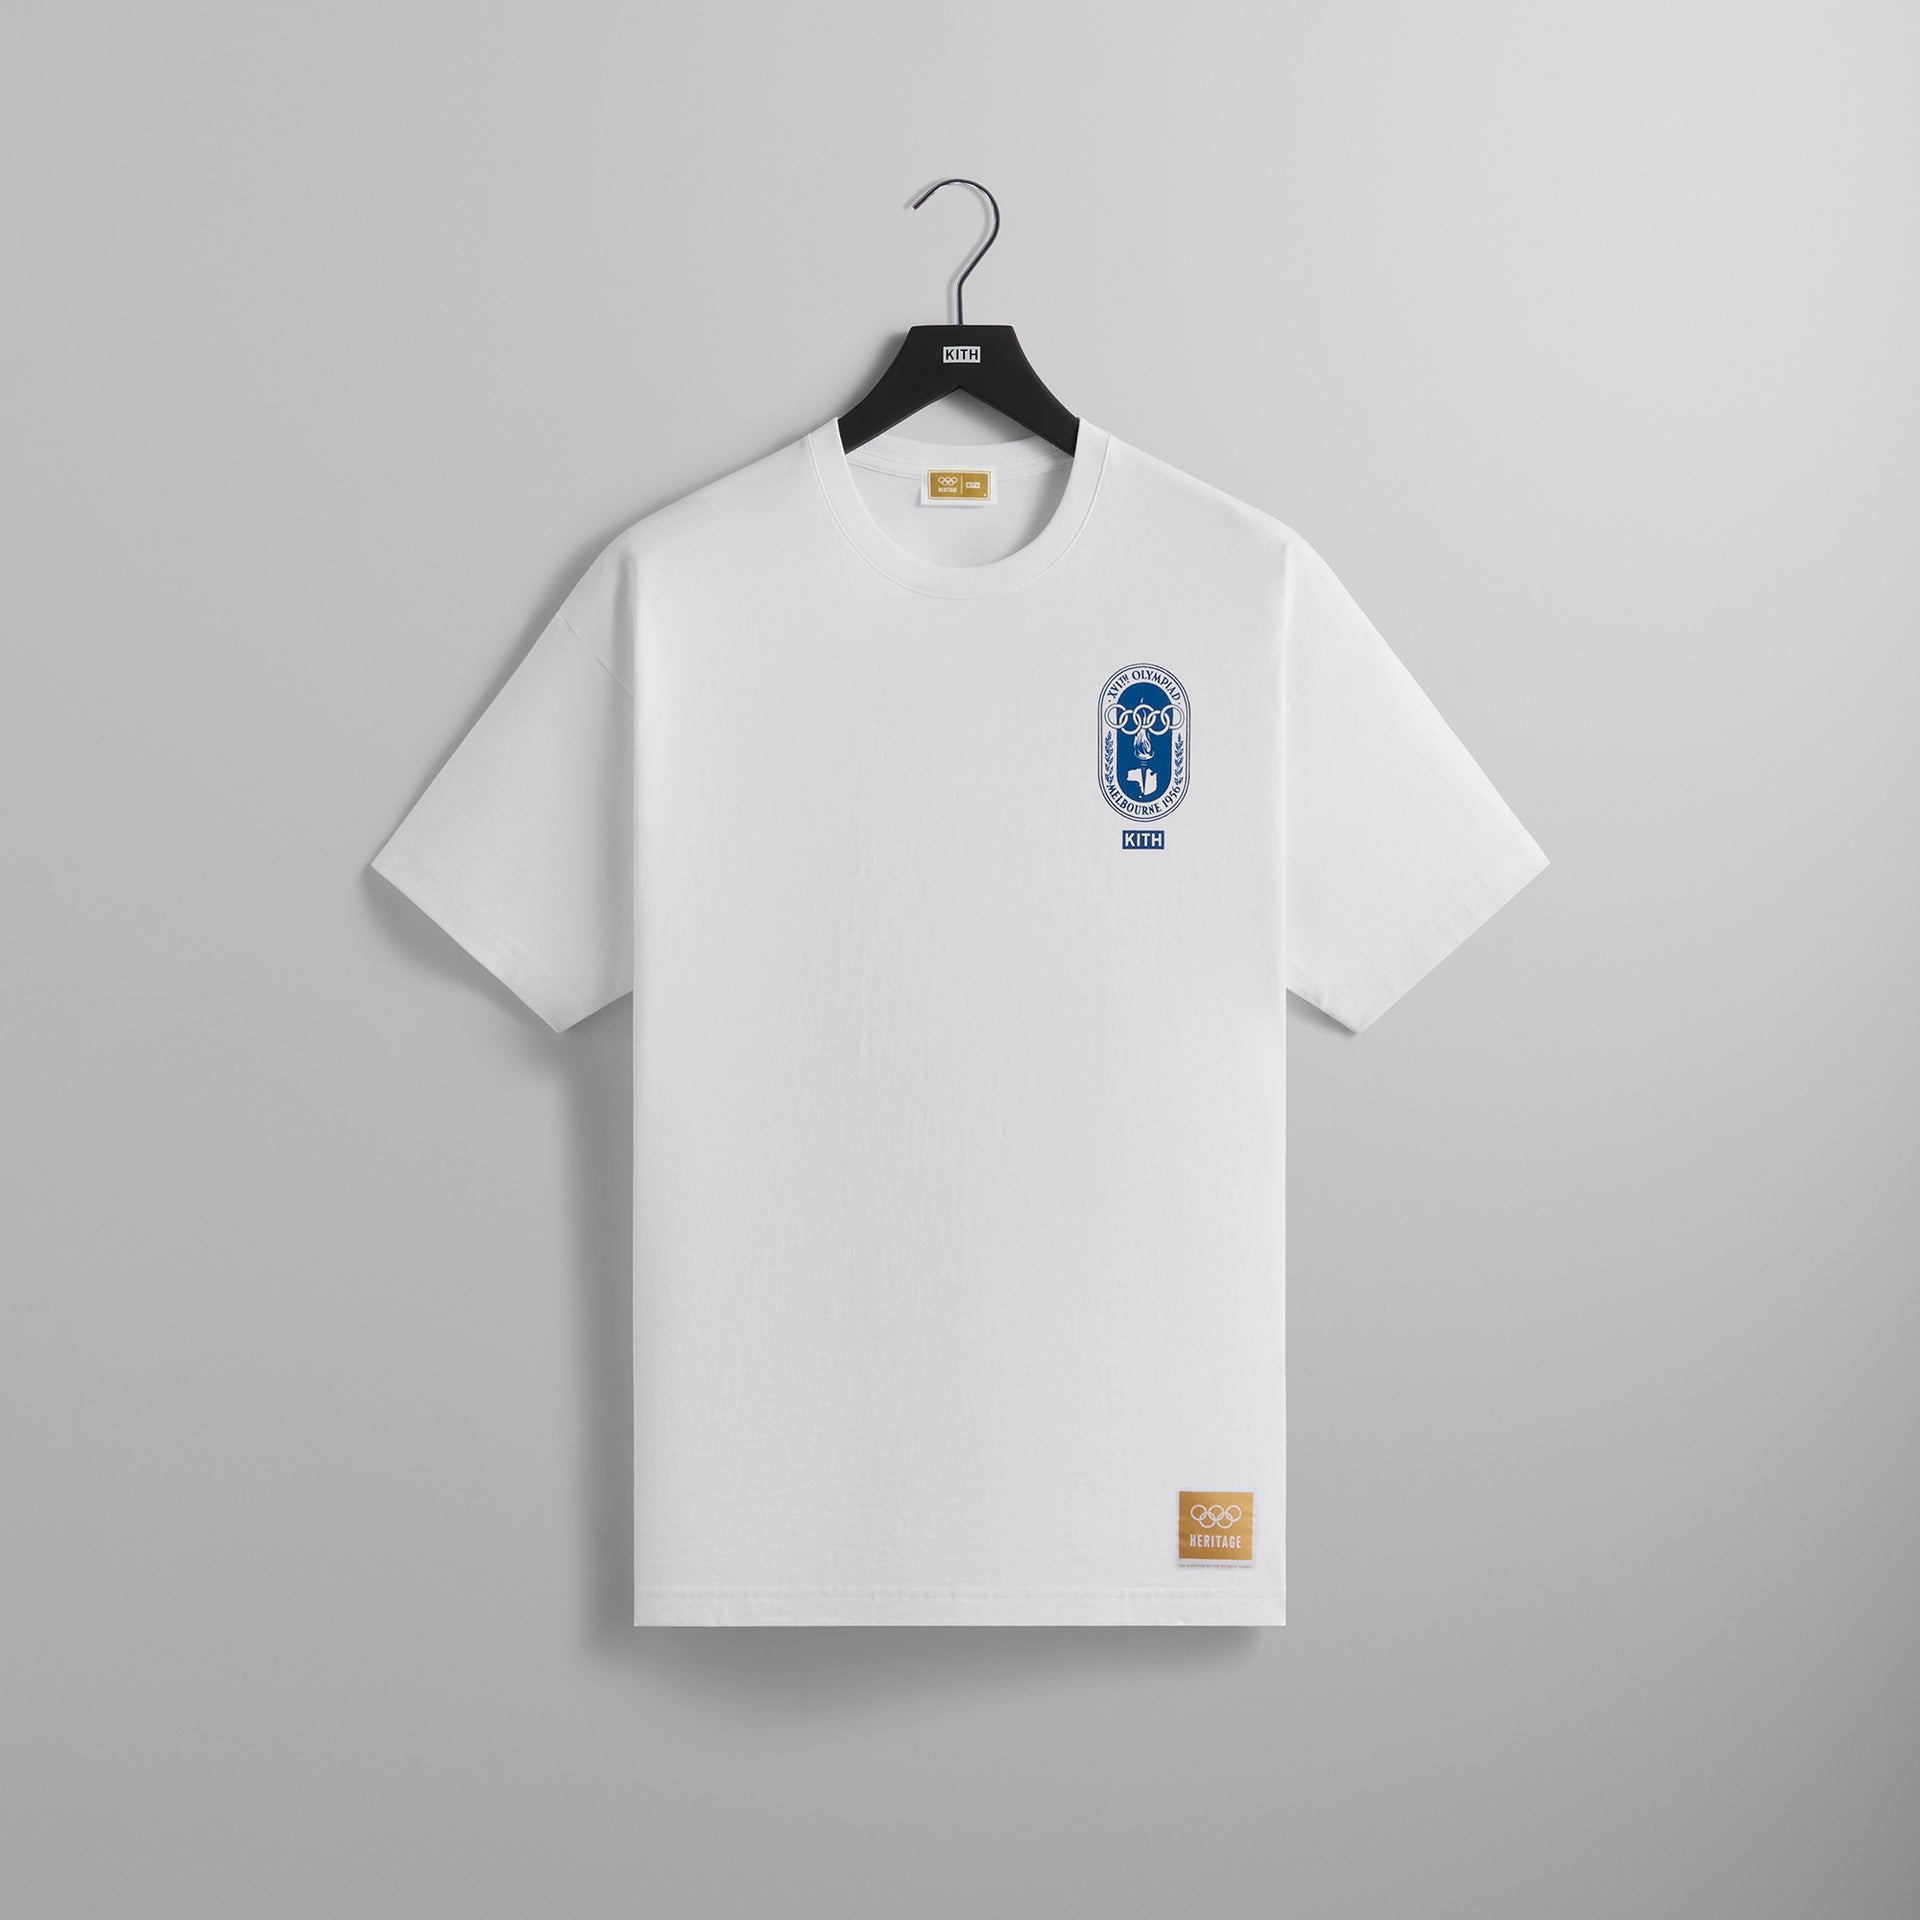 Kith for Olympics Heritage Melbourne 1956 Vintage Tee - White